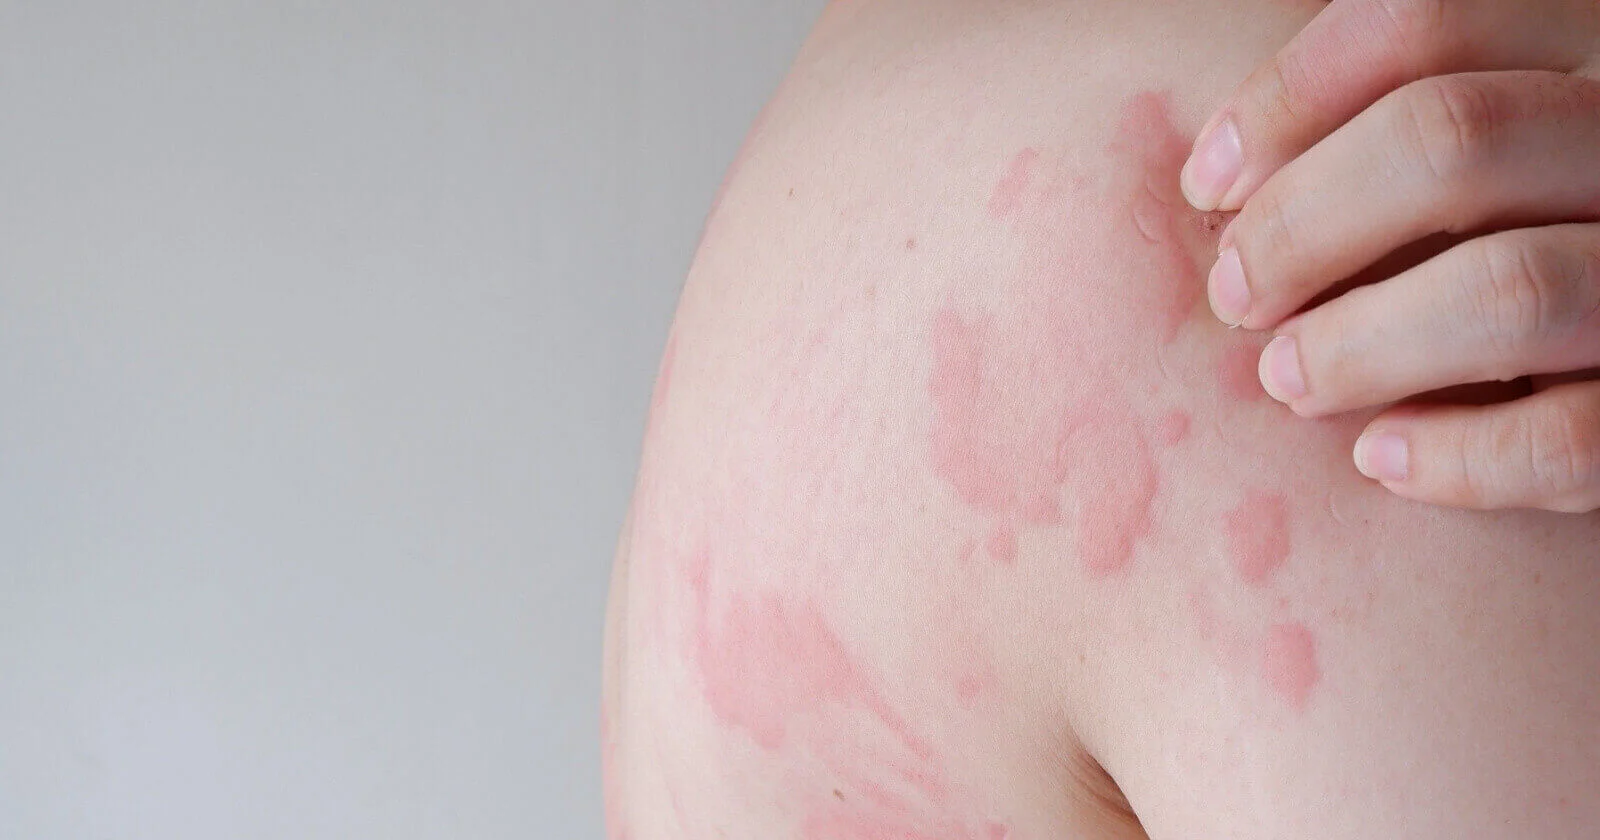 Get Natural Relief from Your Hives With Proven Urticaria Treatments